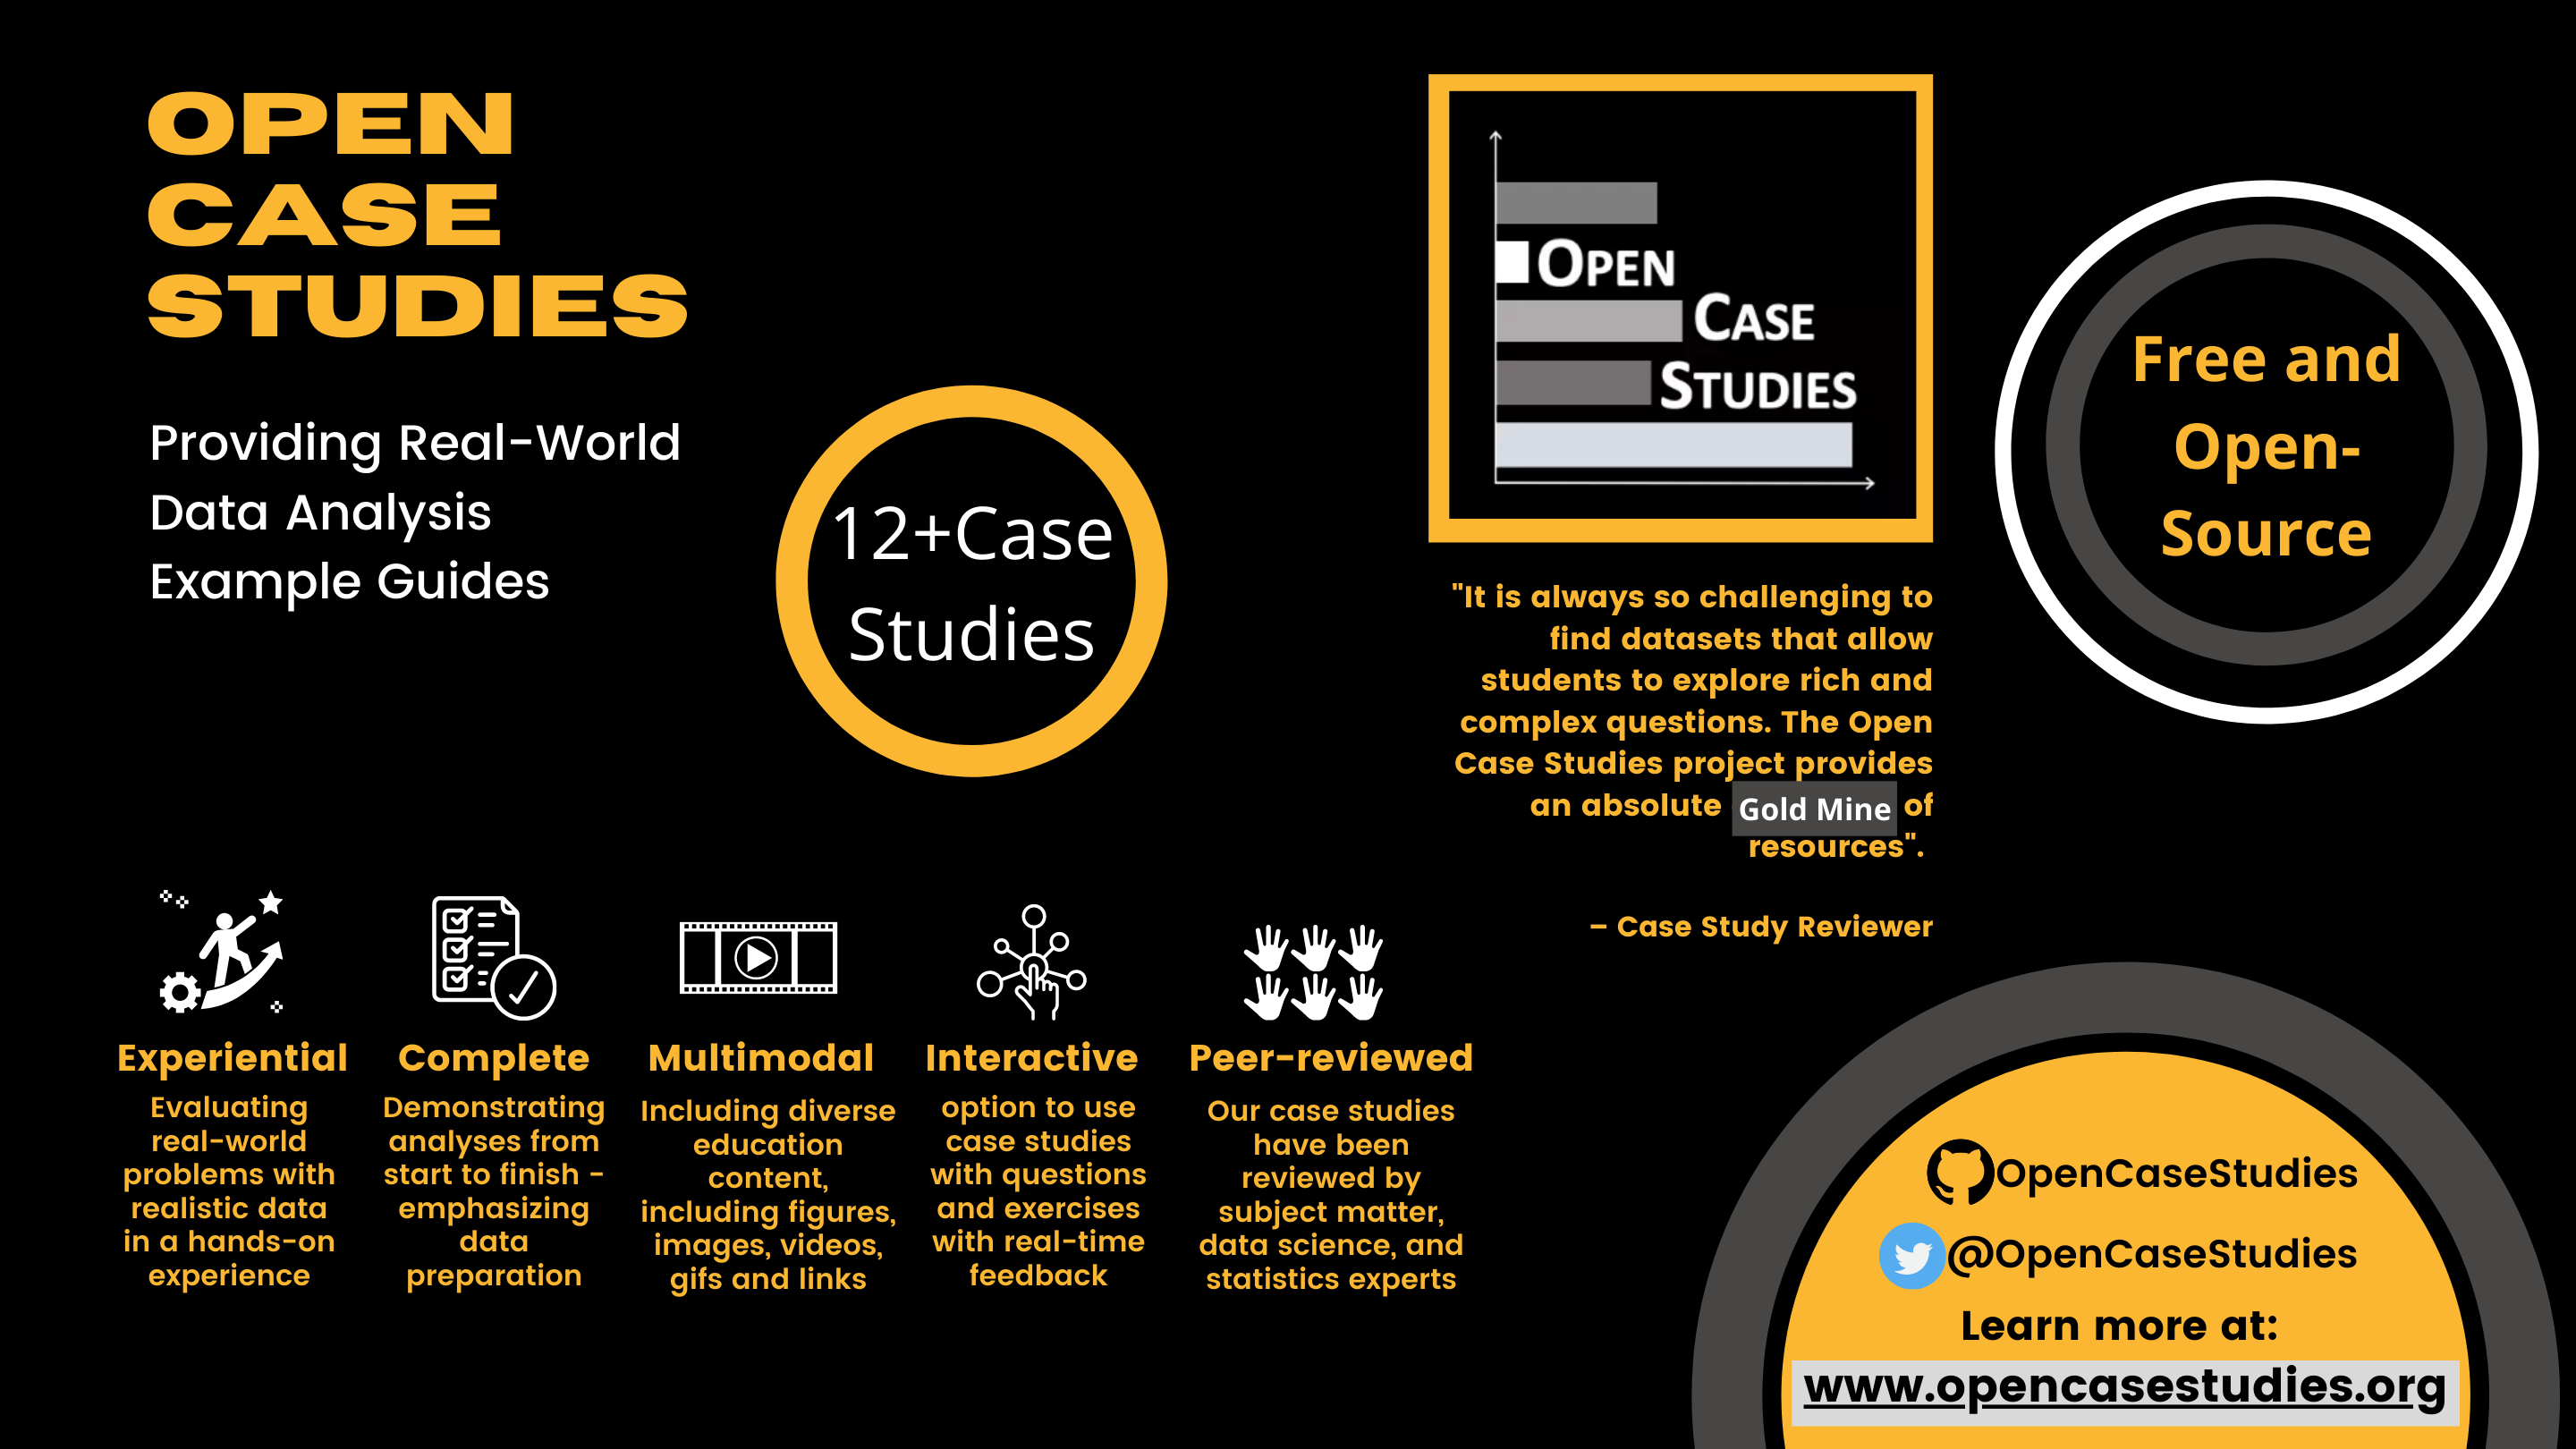 Open Case Study graphic stating that open case studies provide real-world data analysis examples, that there are over 12 currently, that they are free and open-source, that the github organization is OpenCaseStudies, that the twitter handle is @OpenCaseStudies, and that the website is www.opencasestudies.org. There is a quote that says - it is always so challenging to find datasets that allow students to explore rich and complex questions. The Open Case Studies project provides an absolute gold mine of resources - from a case study reviewer. It also says that case studies are experiential - evaluating real-world problems with realistic data in a hands-on experience, complete - Demonstrating analyses from start to finish emphasizing data prepration, multimodal - including diverse education content including figures, images, videos, gifs and links, interactive - option to use case studies with questions and exercises with real-time feedback, and peer-reviewed - our case studies have been reviewed by subject matter, data science, and statistics experts.